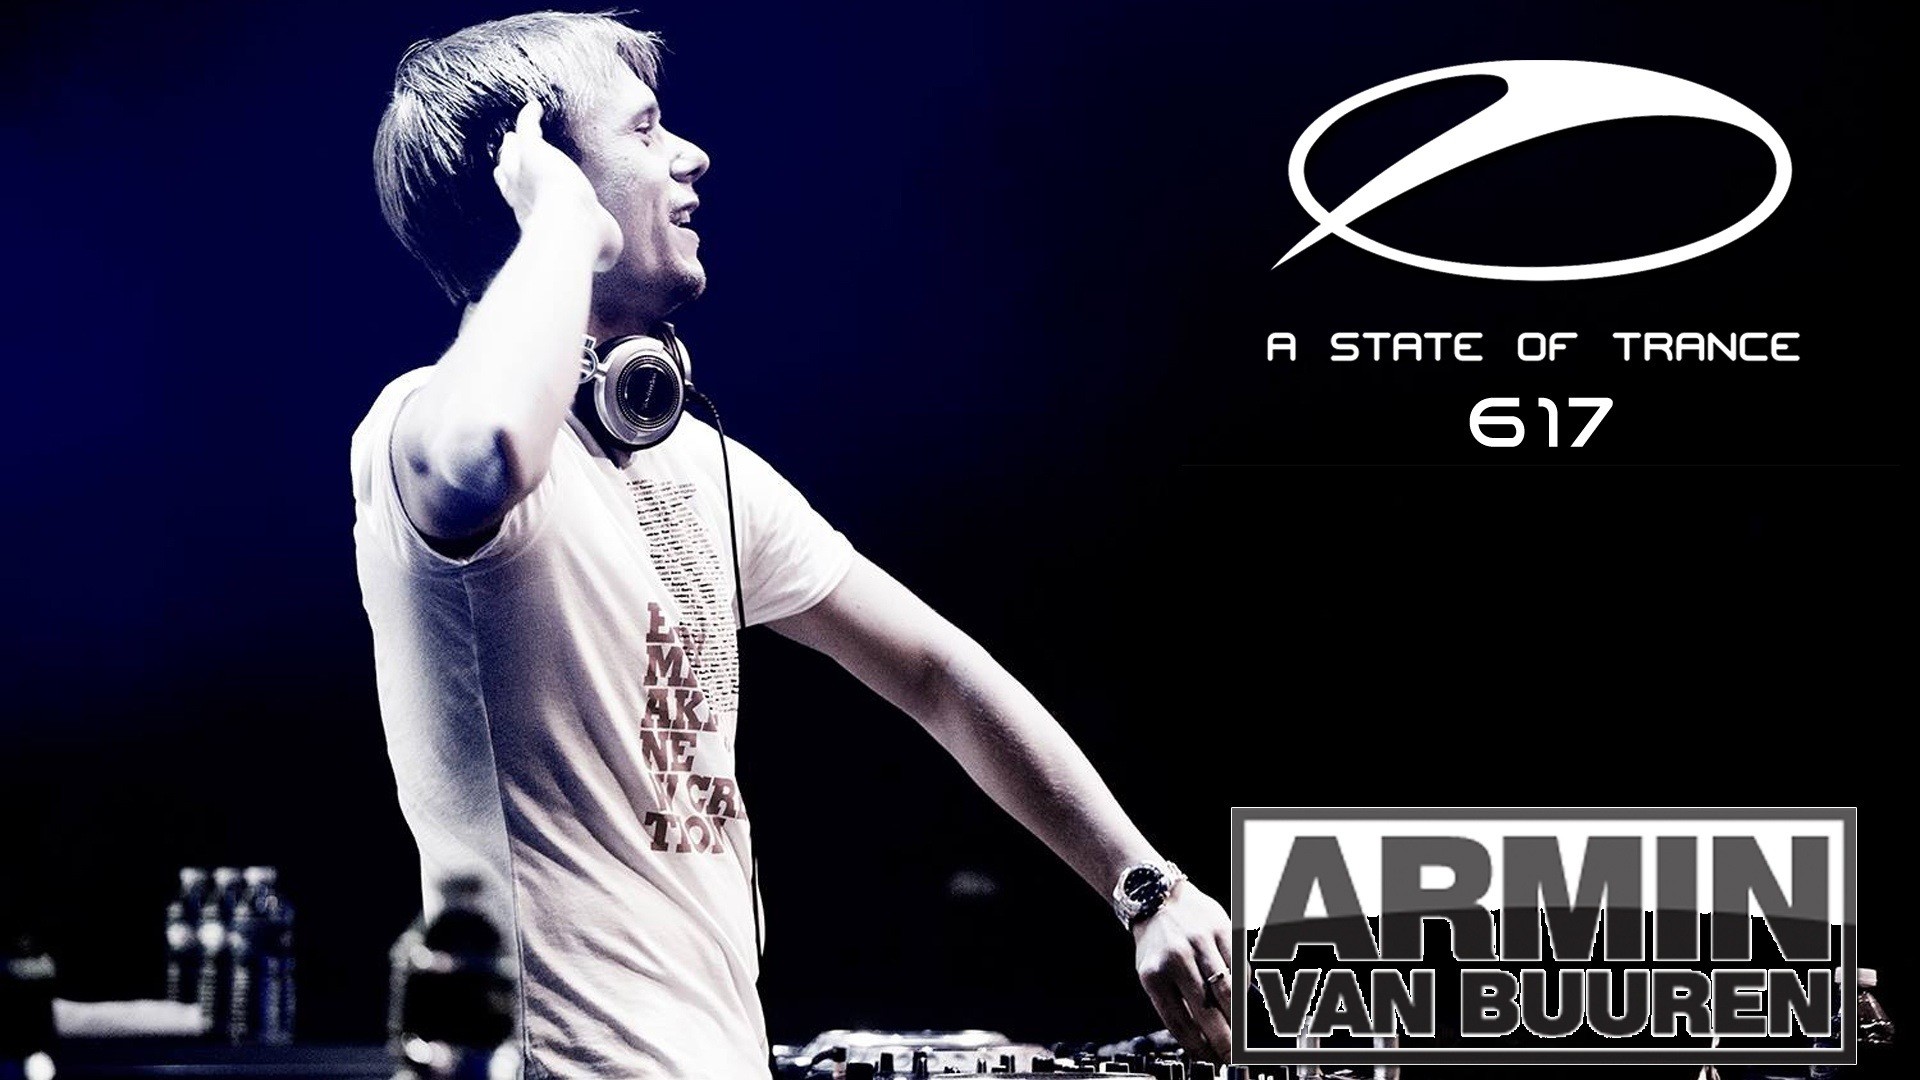 1920x1080 A State Of Trance 617 (13.06.2013) with Armin van Buuren | TranceAttack